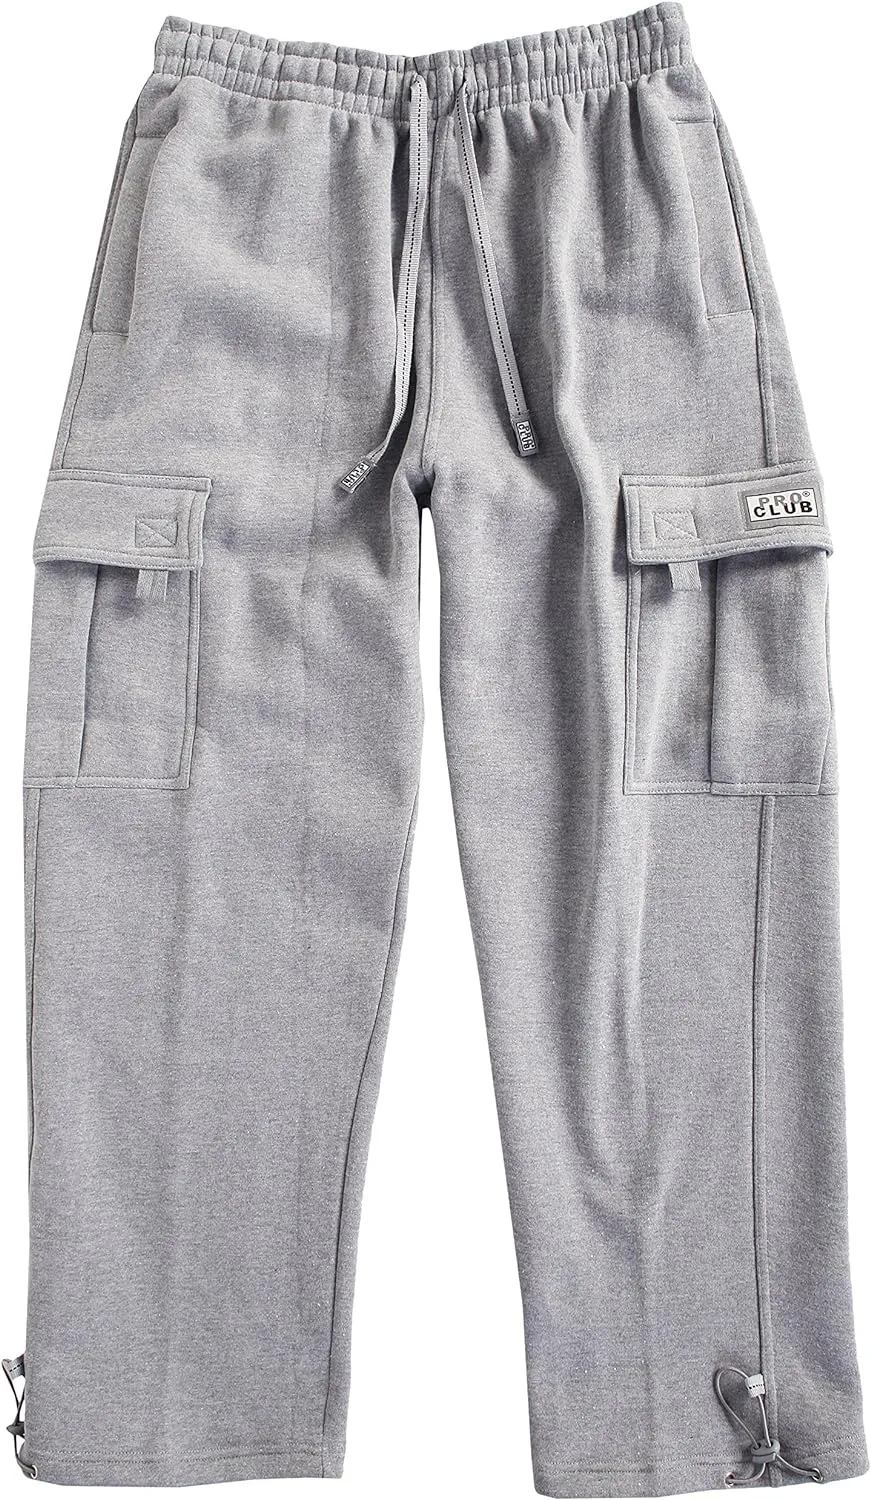 Mens Pro Club Cargo Pants: Heavyweight Fleece, Stretchy Fit, Ideal